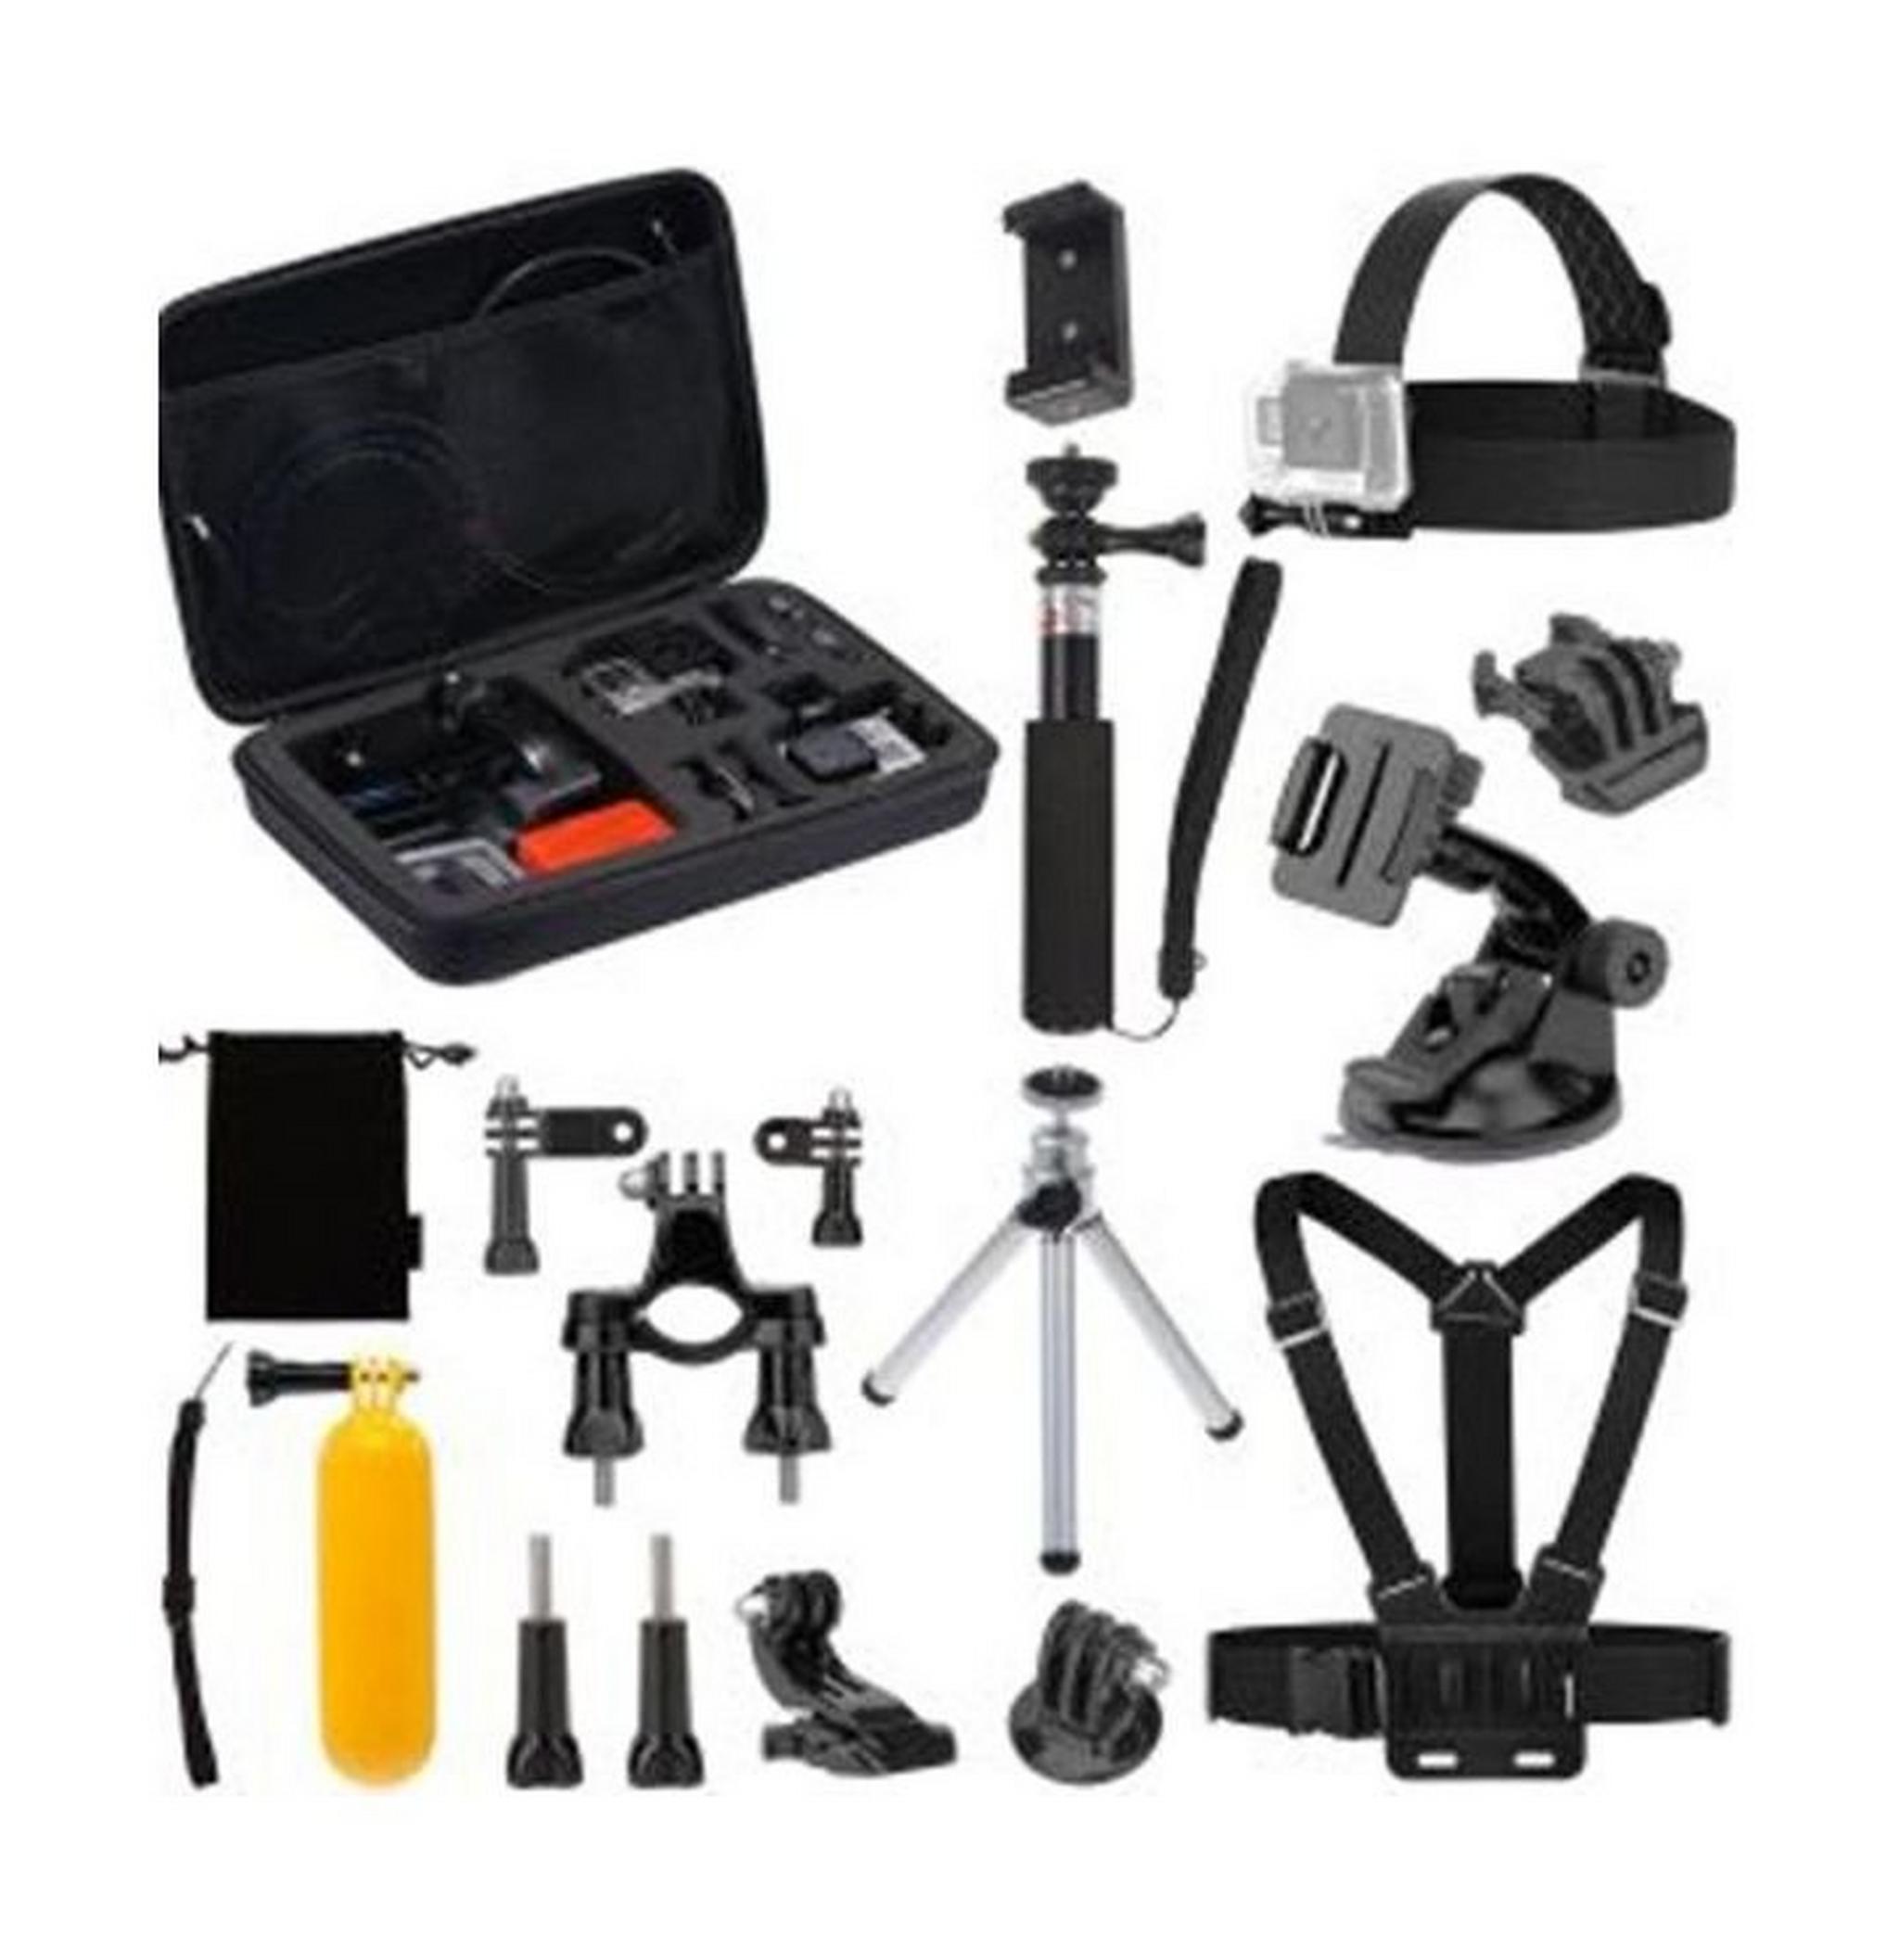 14-in-1 Accessories Kit for Gopro (GOPRO ACC. KIT)